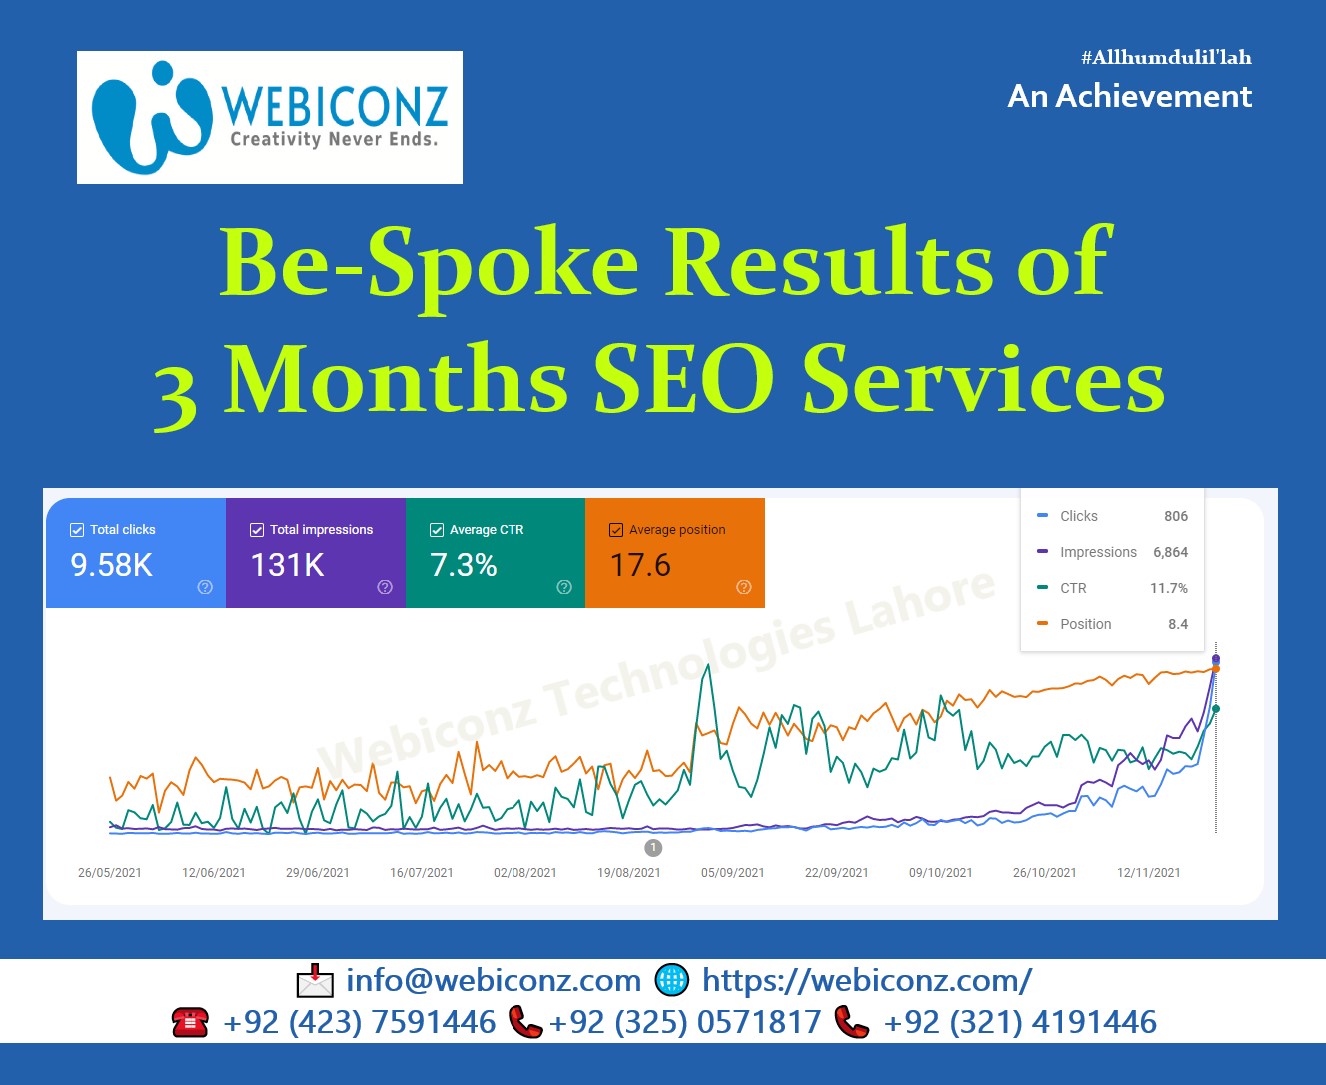 seo company in lahore, seo packages in Pakistan, seo monthly packages, affordable seo services packages, seo packages in Karachi, seo expert in Pakistan, ecommerce seo packages, seo package prices, best seo company in lahore, seo company in pakistan, seo company in Islamabad, best seo expert in Pakistan, seo services,